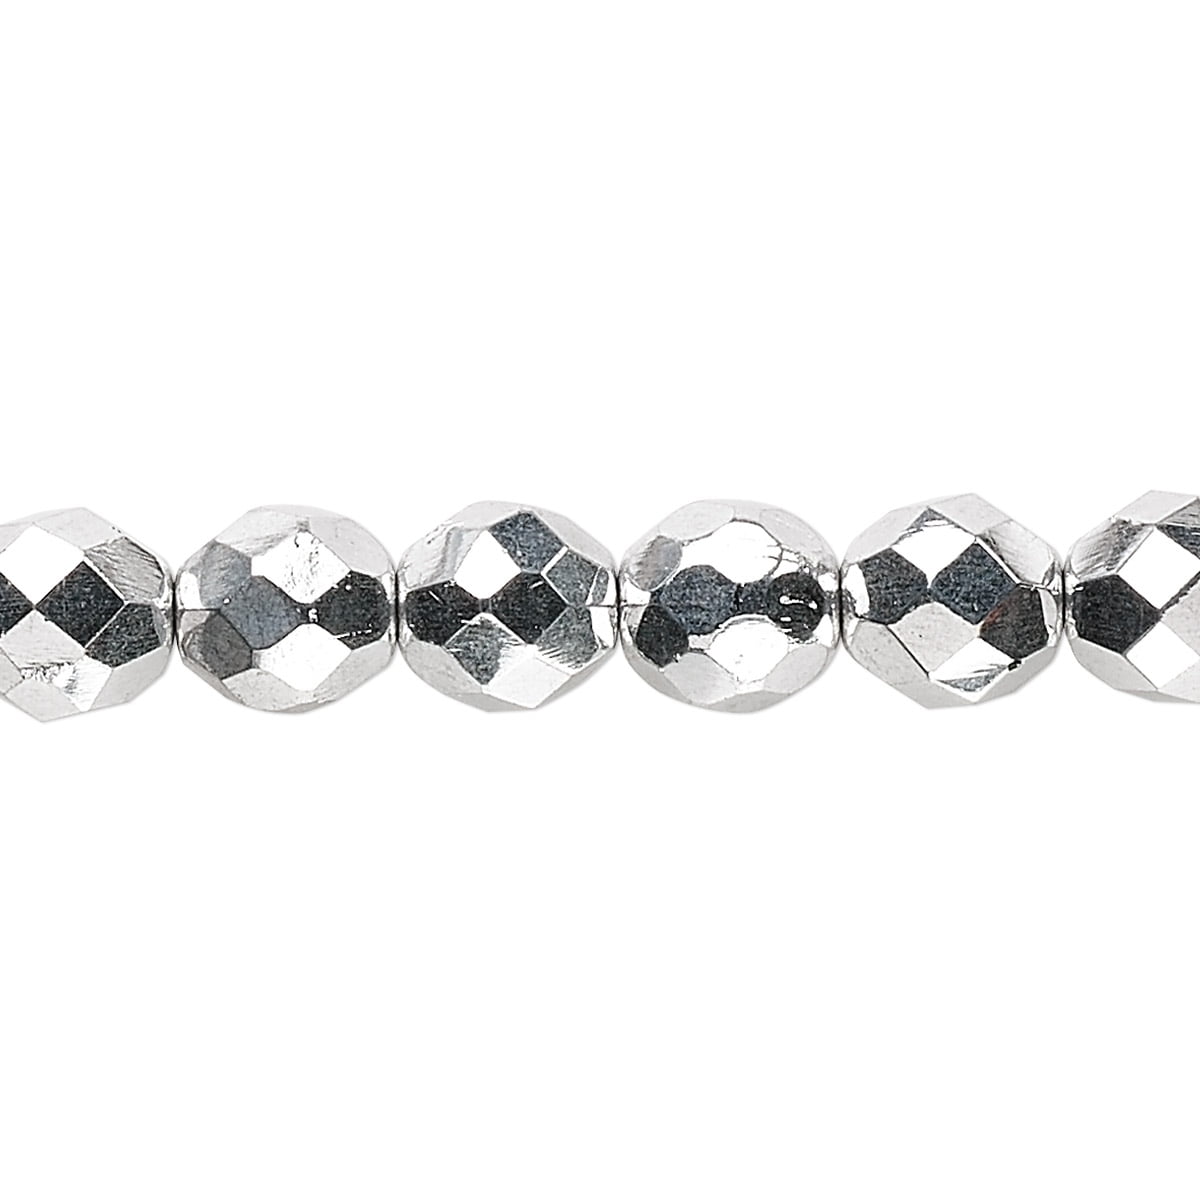 Smooth Shiny Silver Heishi Beads 6mm White Metal 16 Inch Strand 